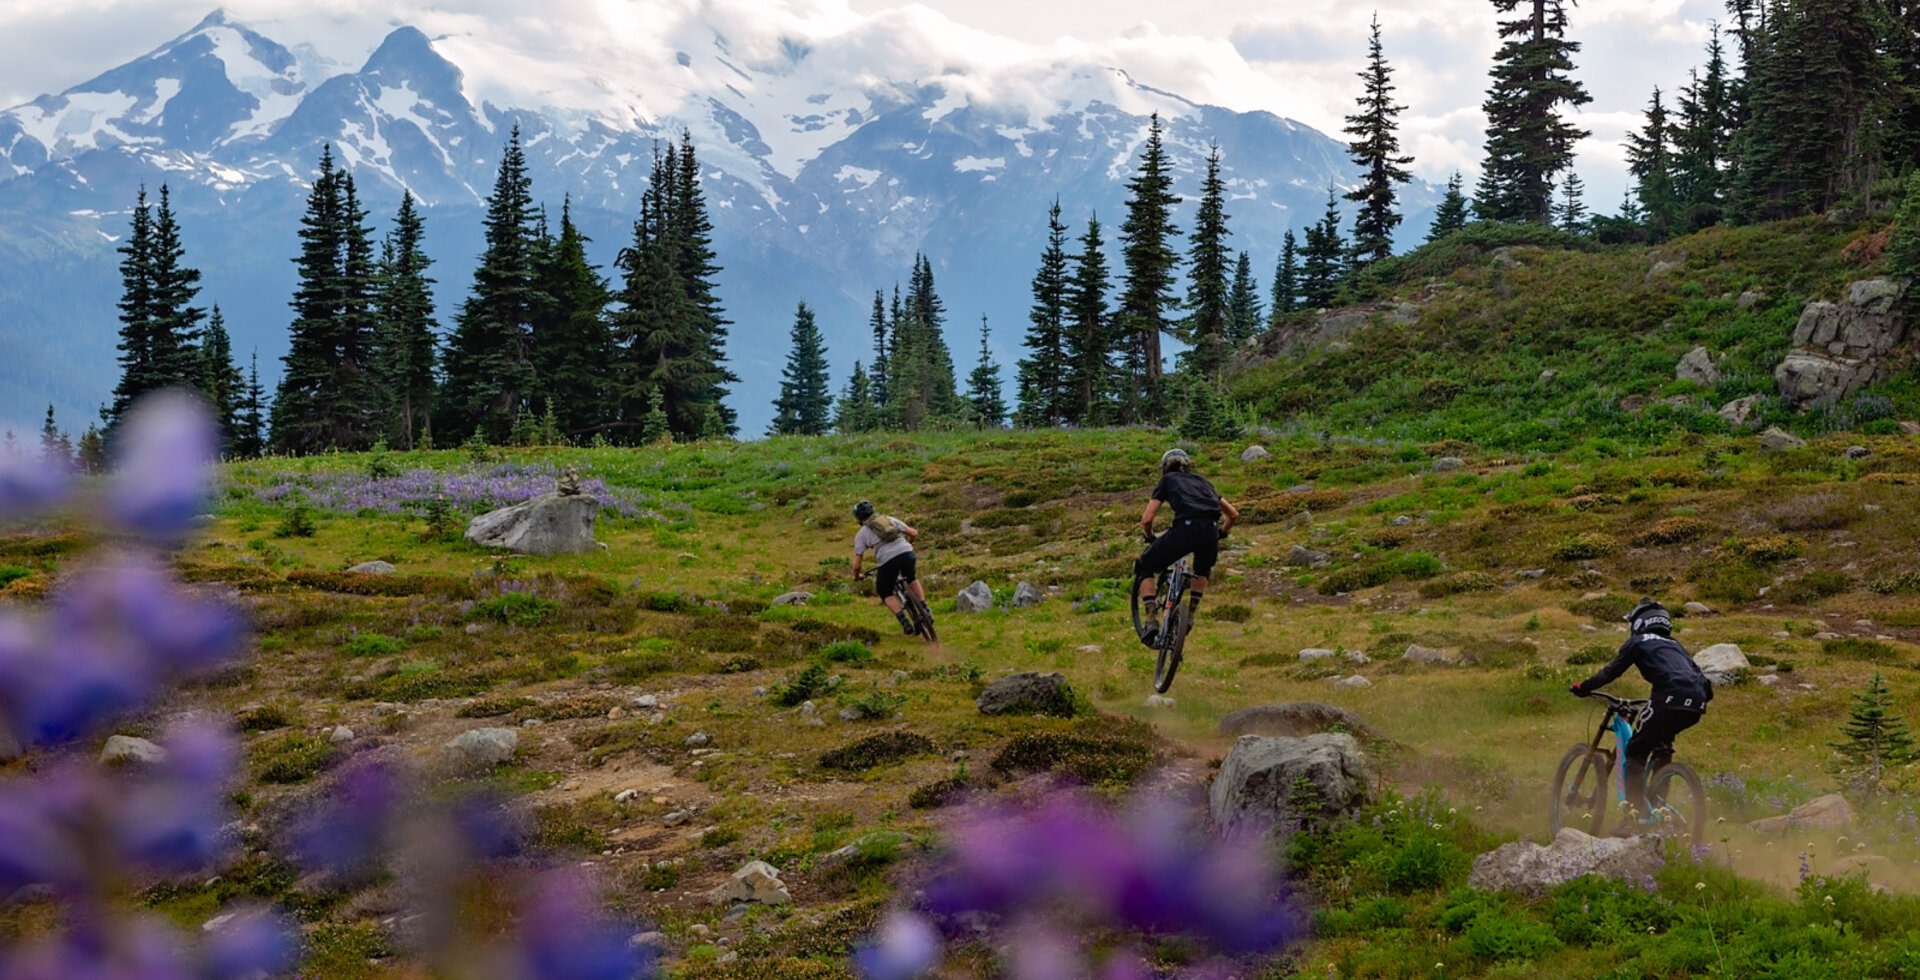 Heli-biking with AlpX Expeditions in the high alpine above Whistler. Photo: Clint Trahan